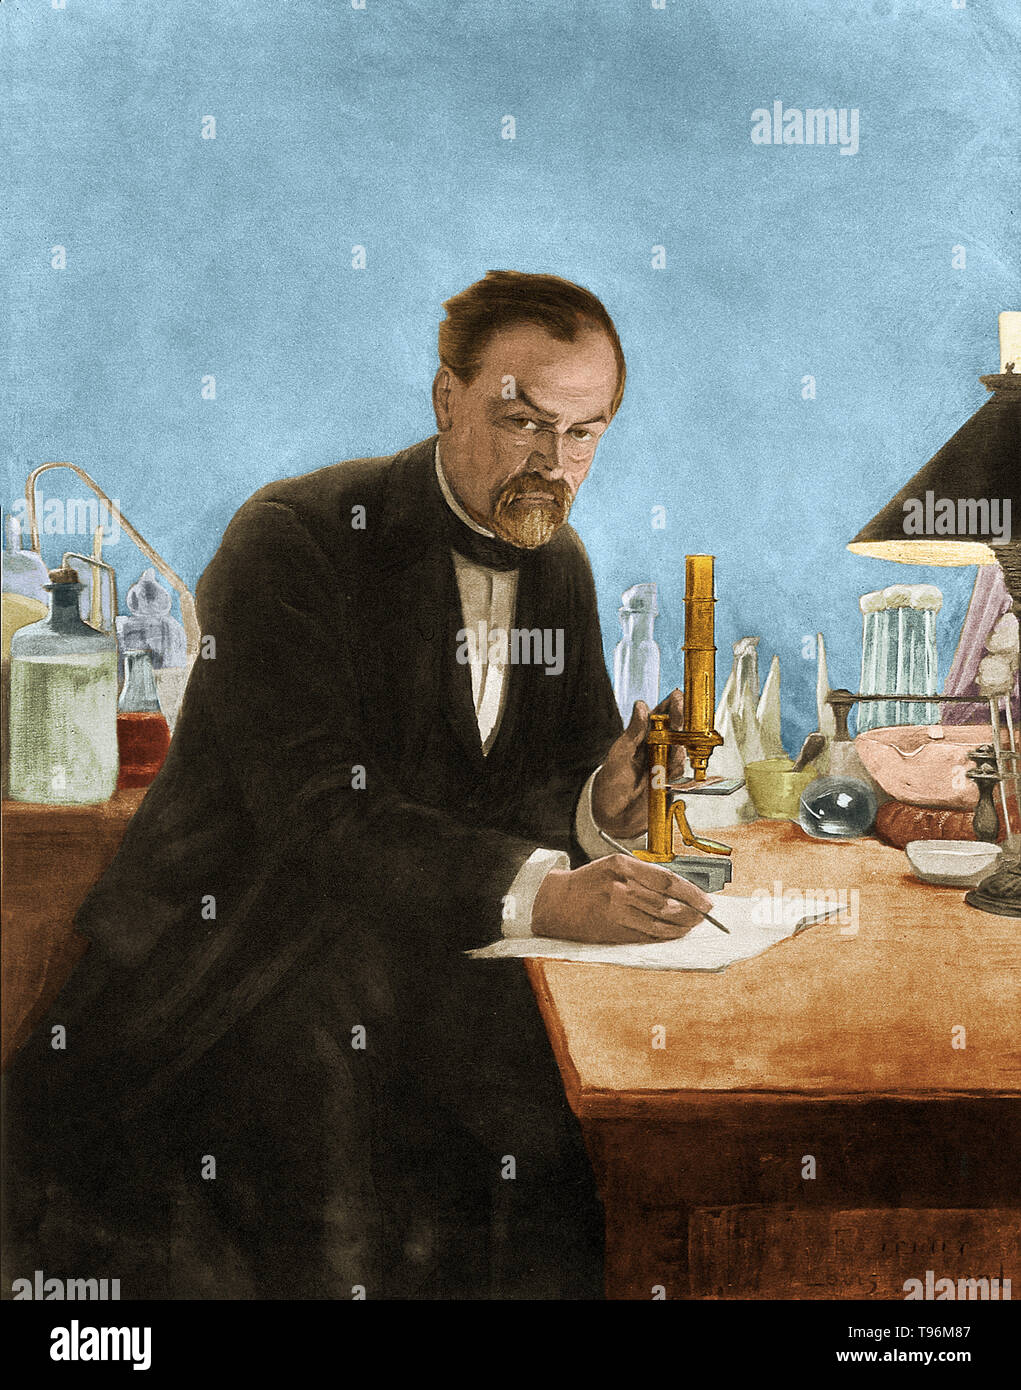 Louis Pasteur in his laboratory. Louis Pasteur (1822 -1895) was a French chemist and bacteriologist who founded the science of microbiology. Pasteur discovered that disease could be caused by bacteria transmitted from person to person (the germ theory of disease). He also developed vaccines for rabies and anthrax. Pasteur also found that lightly heating food and beverages could preserve them from souring. This pasteurization process is now widely used in the food industry. Stock Photo